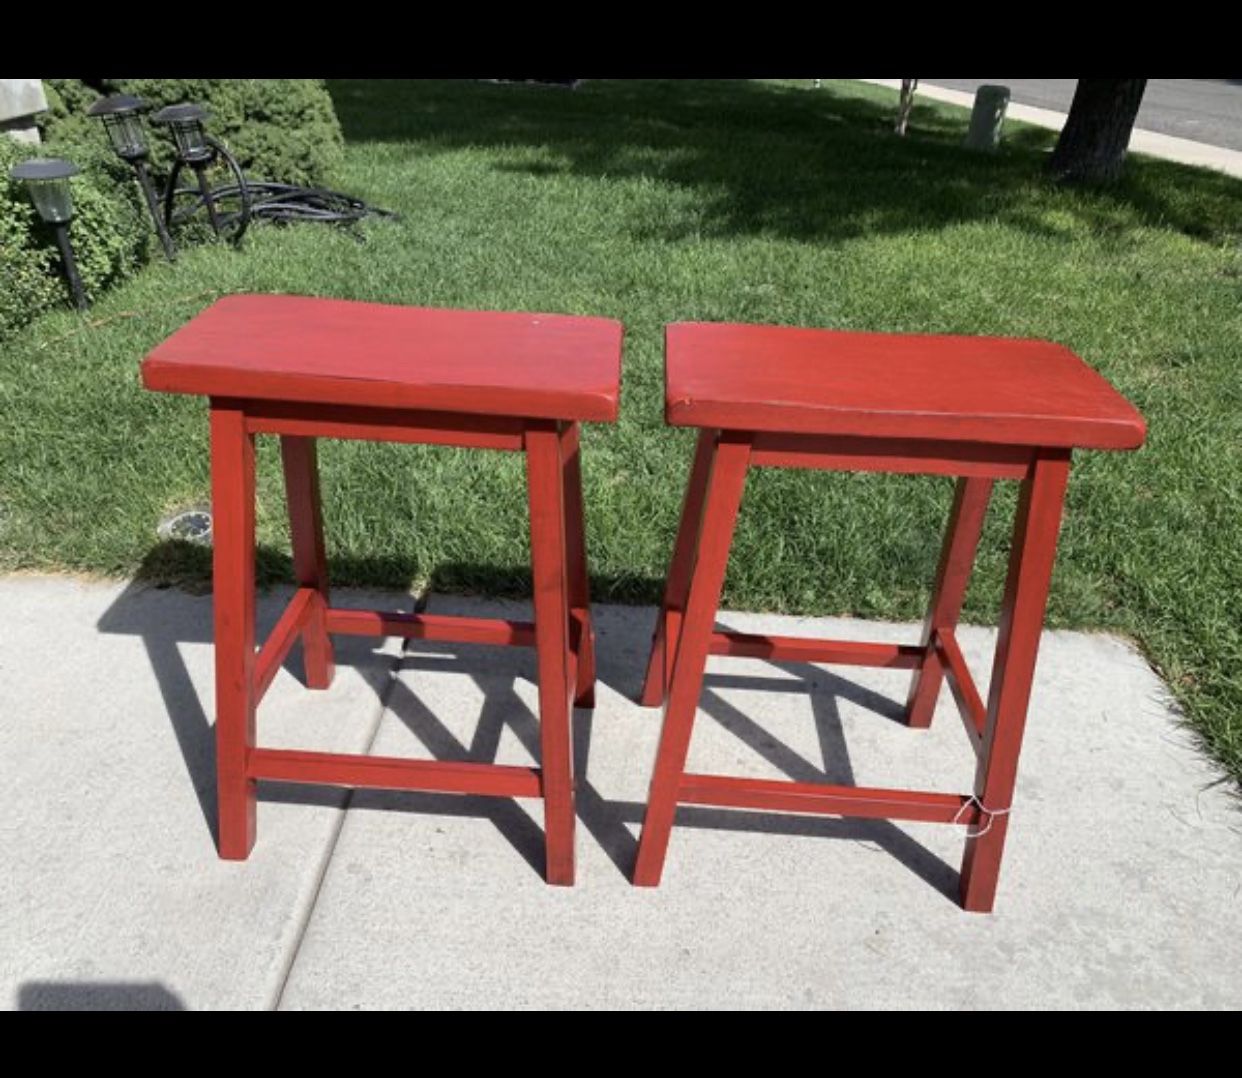 New set of 2 wooden counter stools 24”